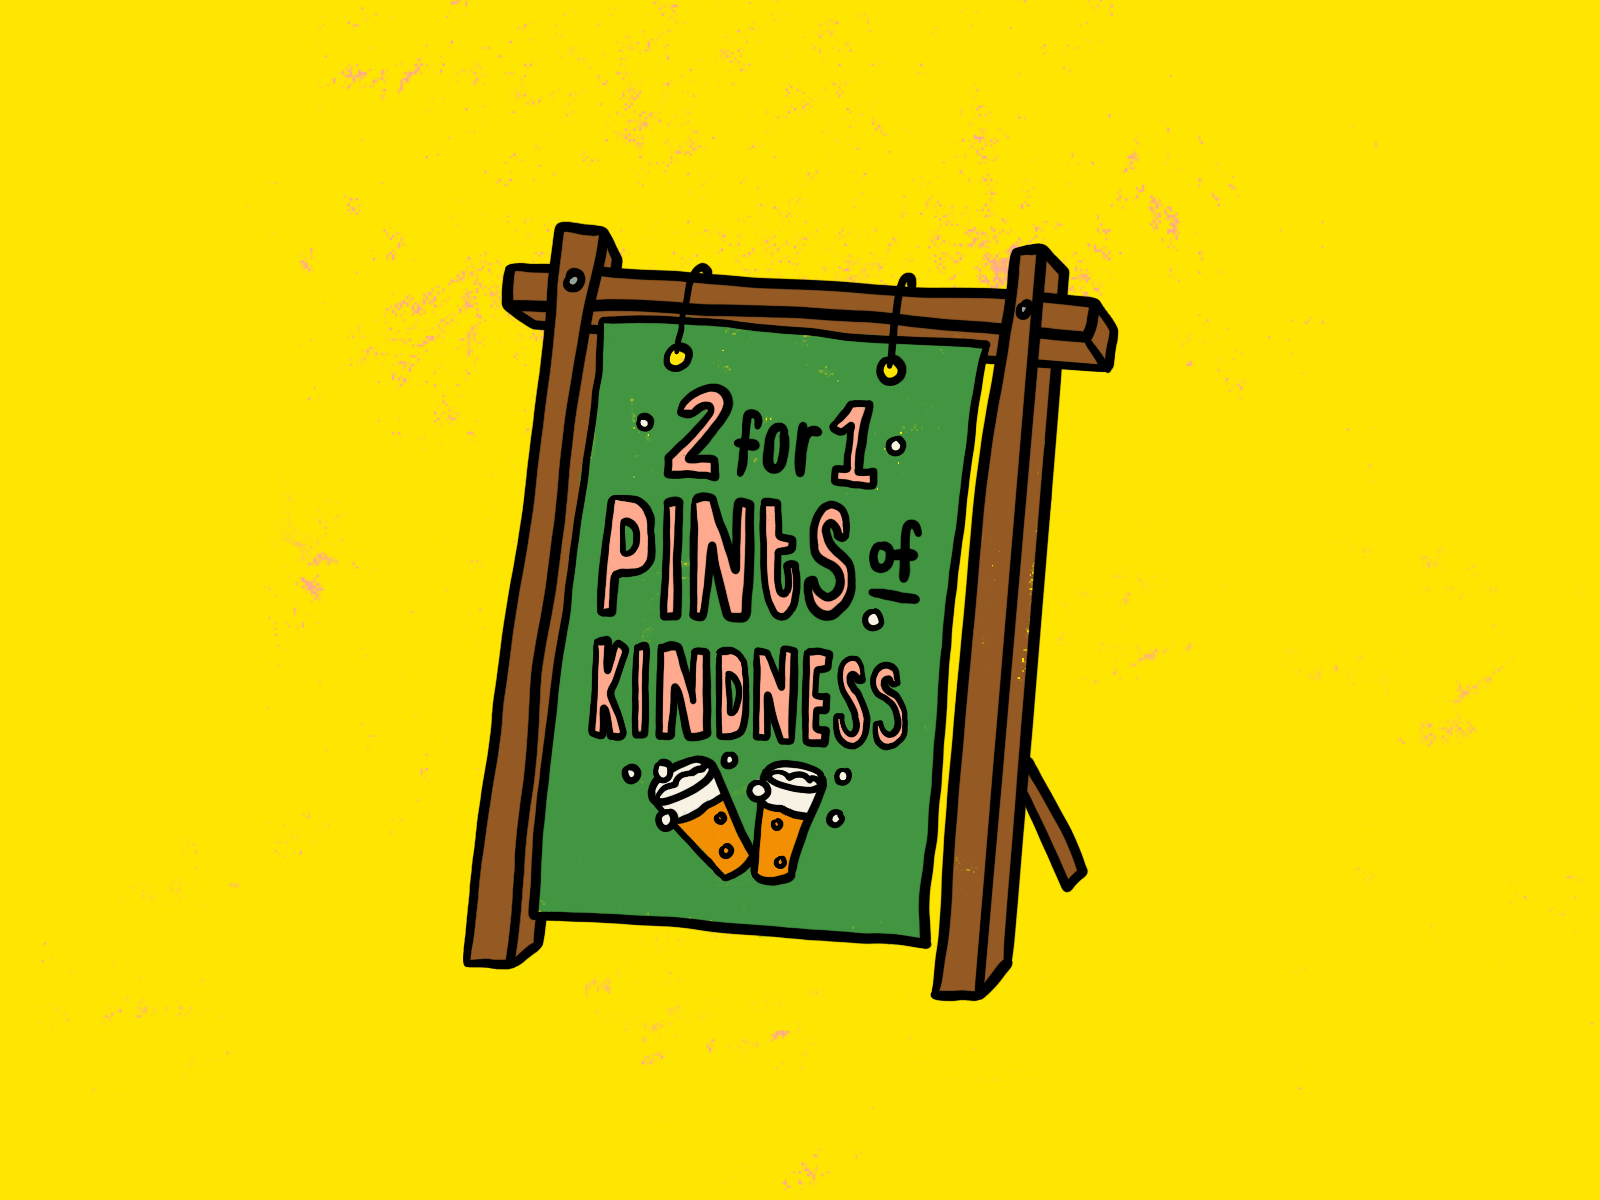 2for1 Pints of Kindness Promo Board